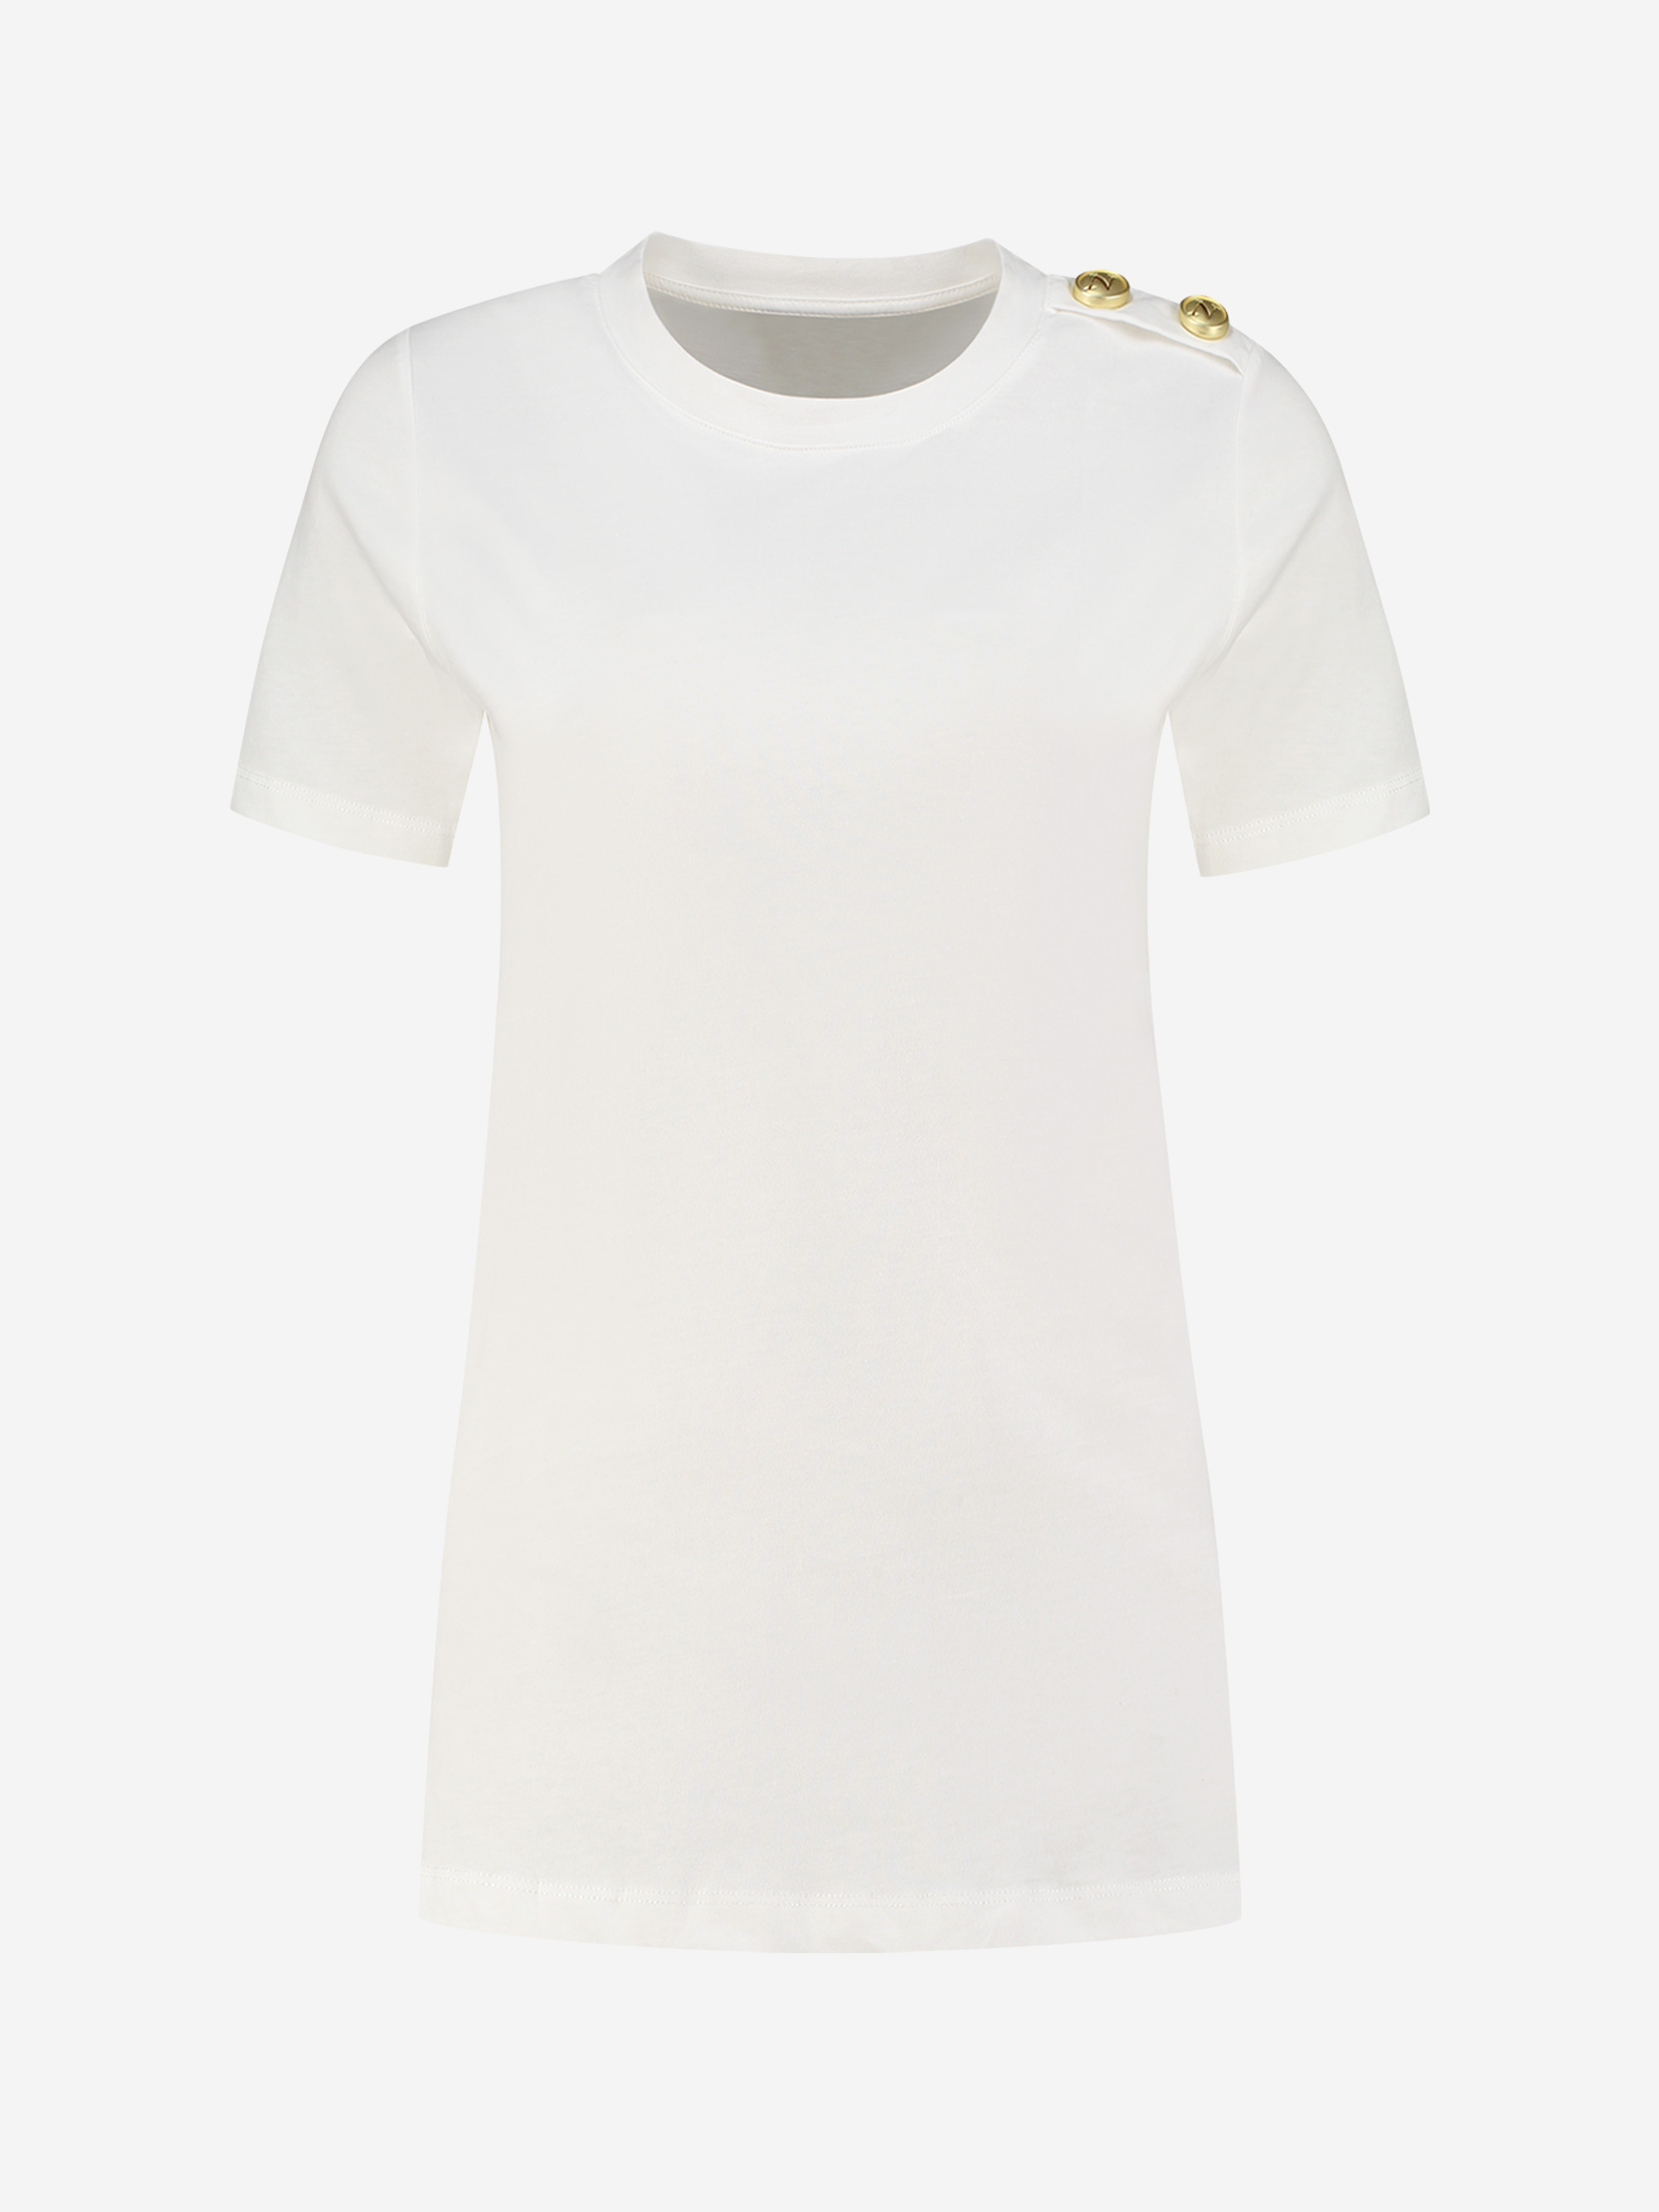 T-shirt with small buttons on shoulder